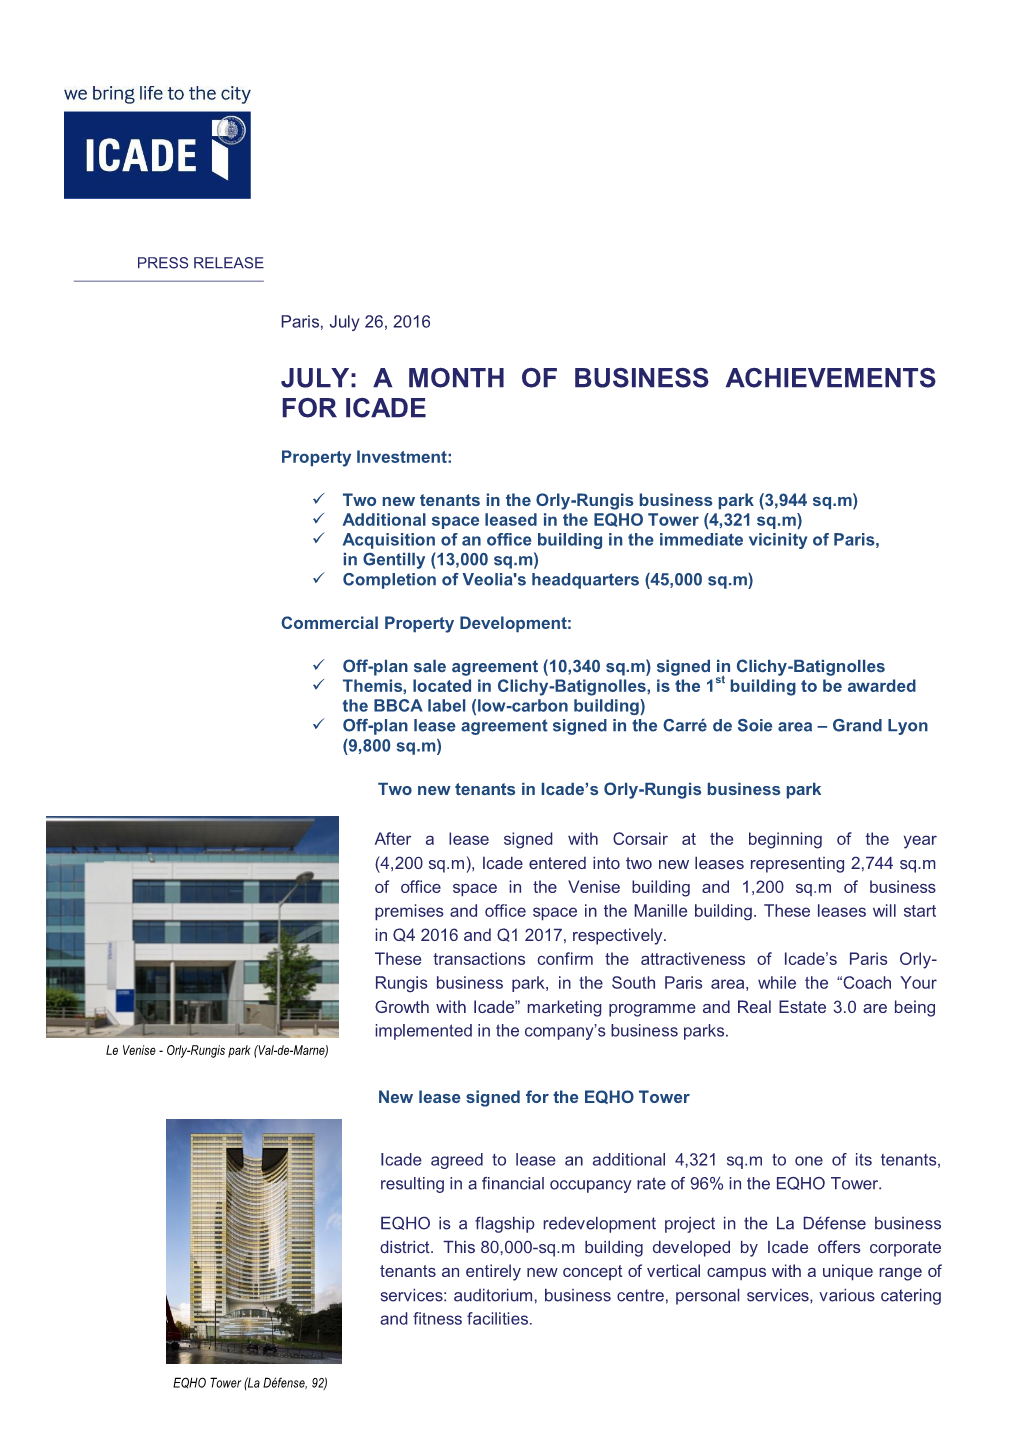 July: a Month of Business Achievements for Icade